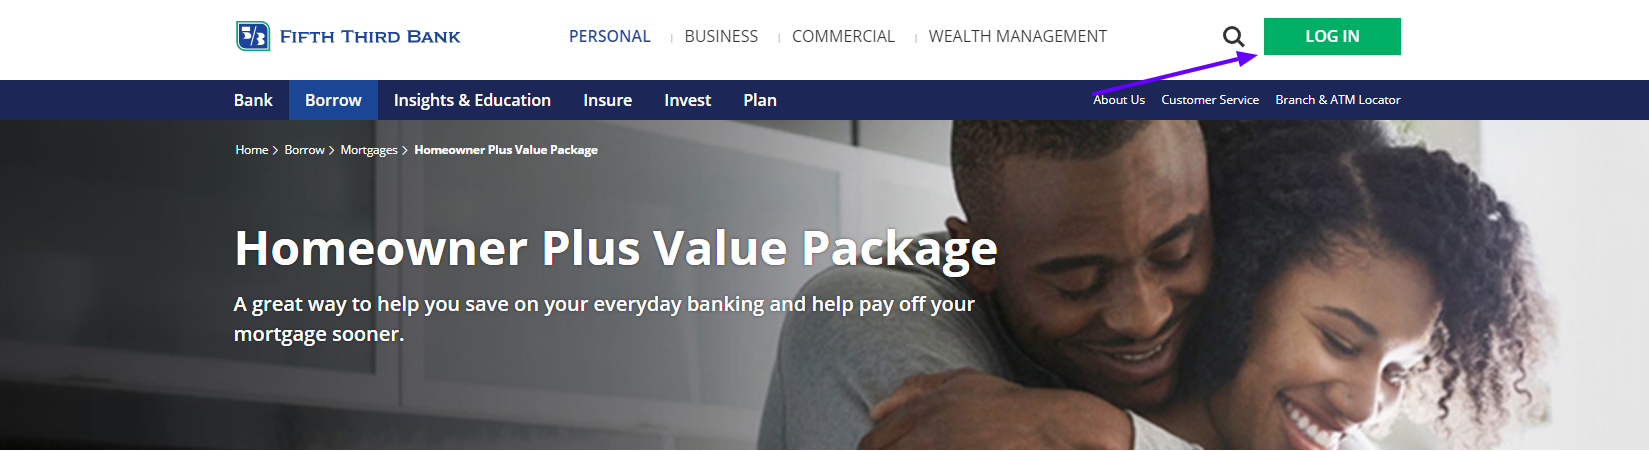 homeowner plus value package fifth third bank